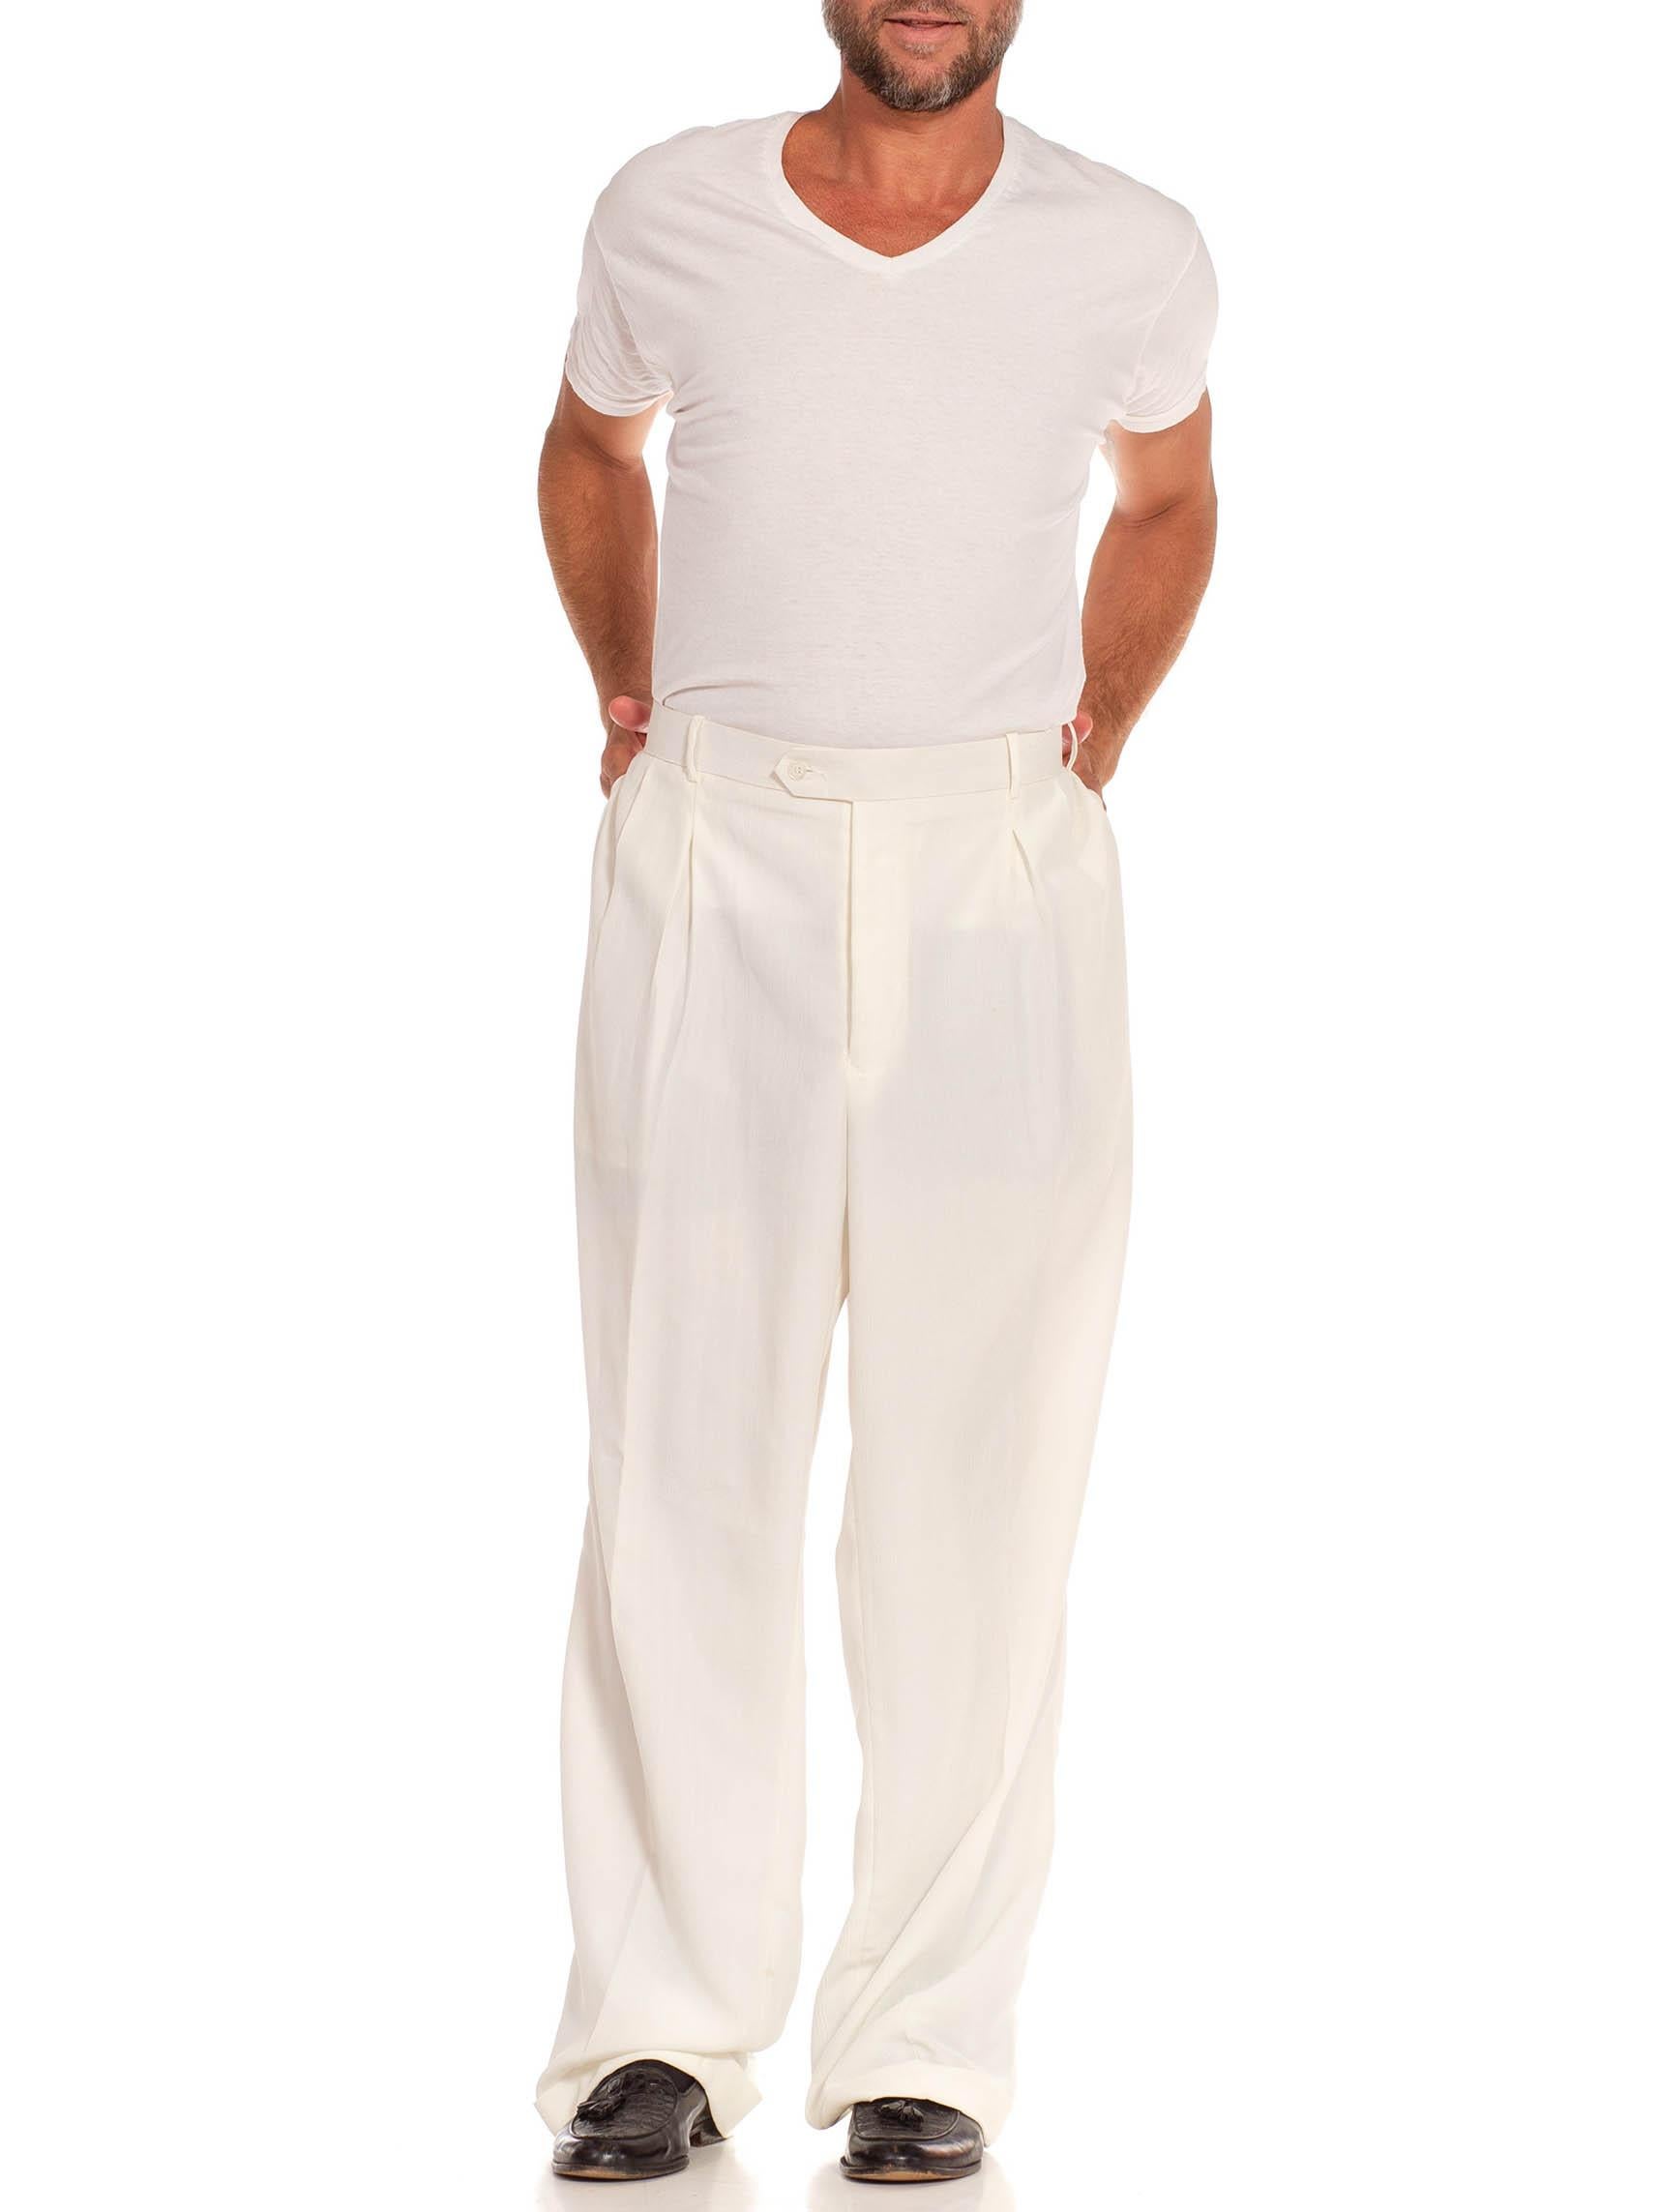 1970S White Polyester Crepe Pants For Sale 1